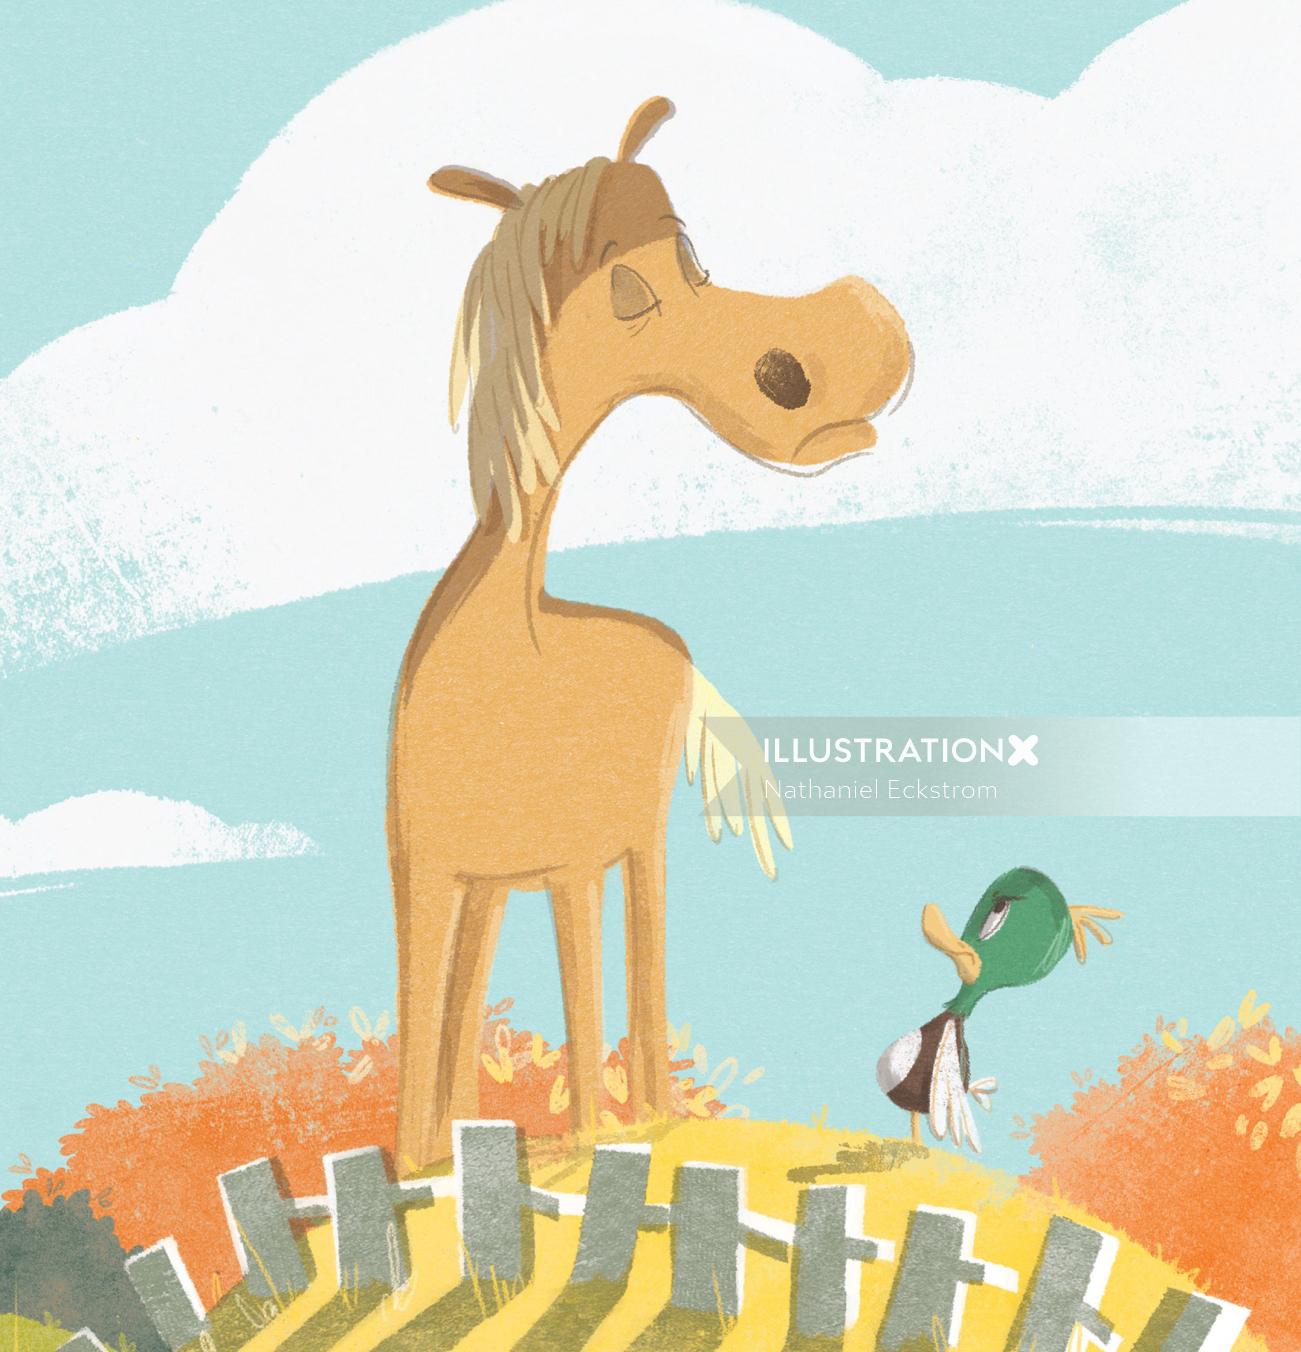 Children's illustration of horse and duck